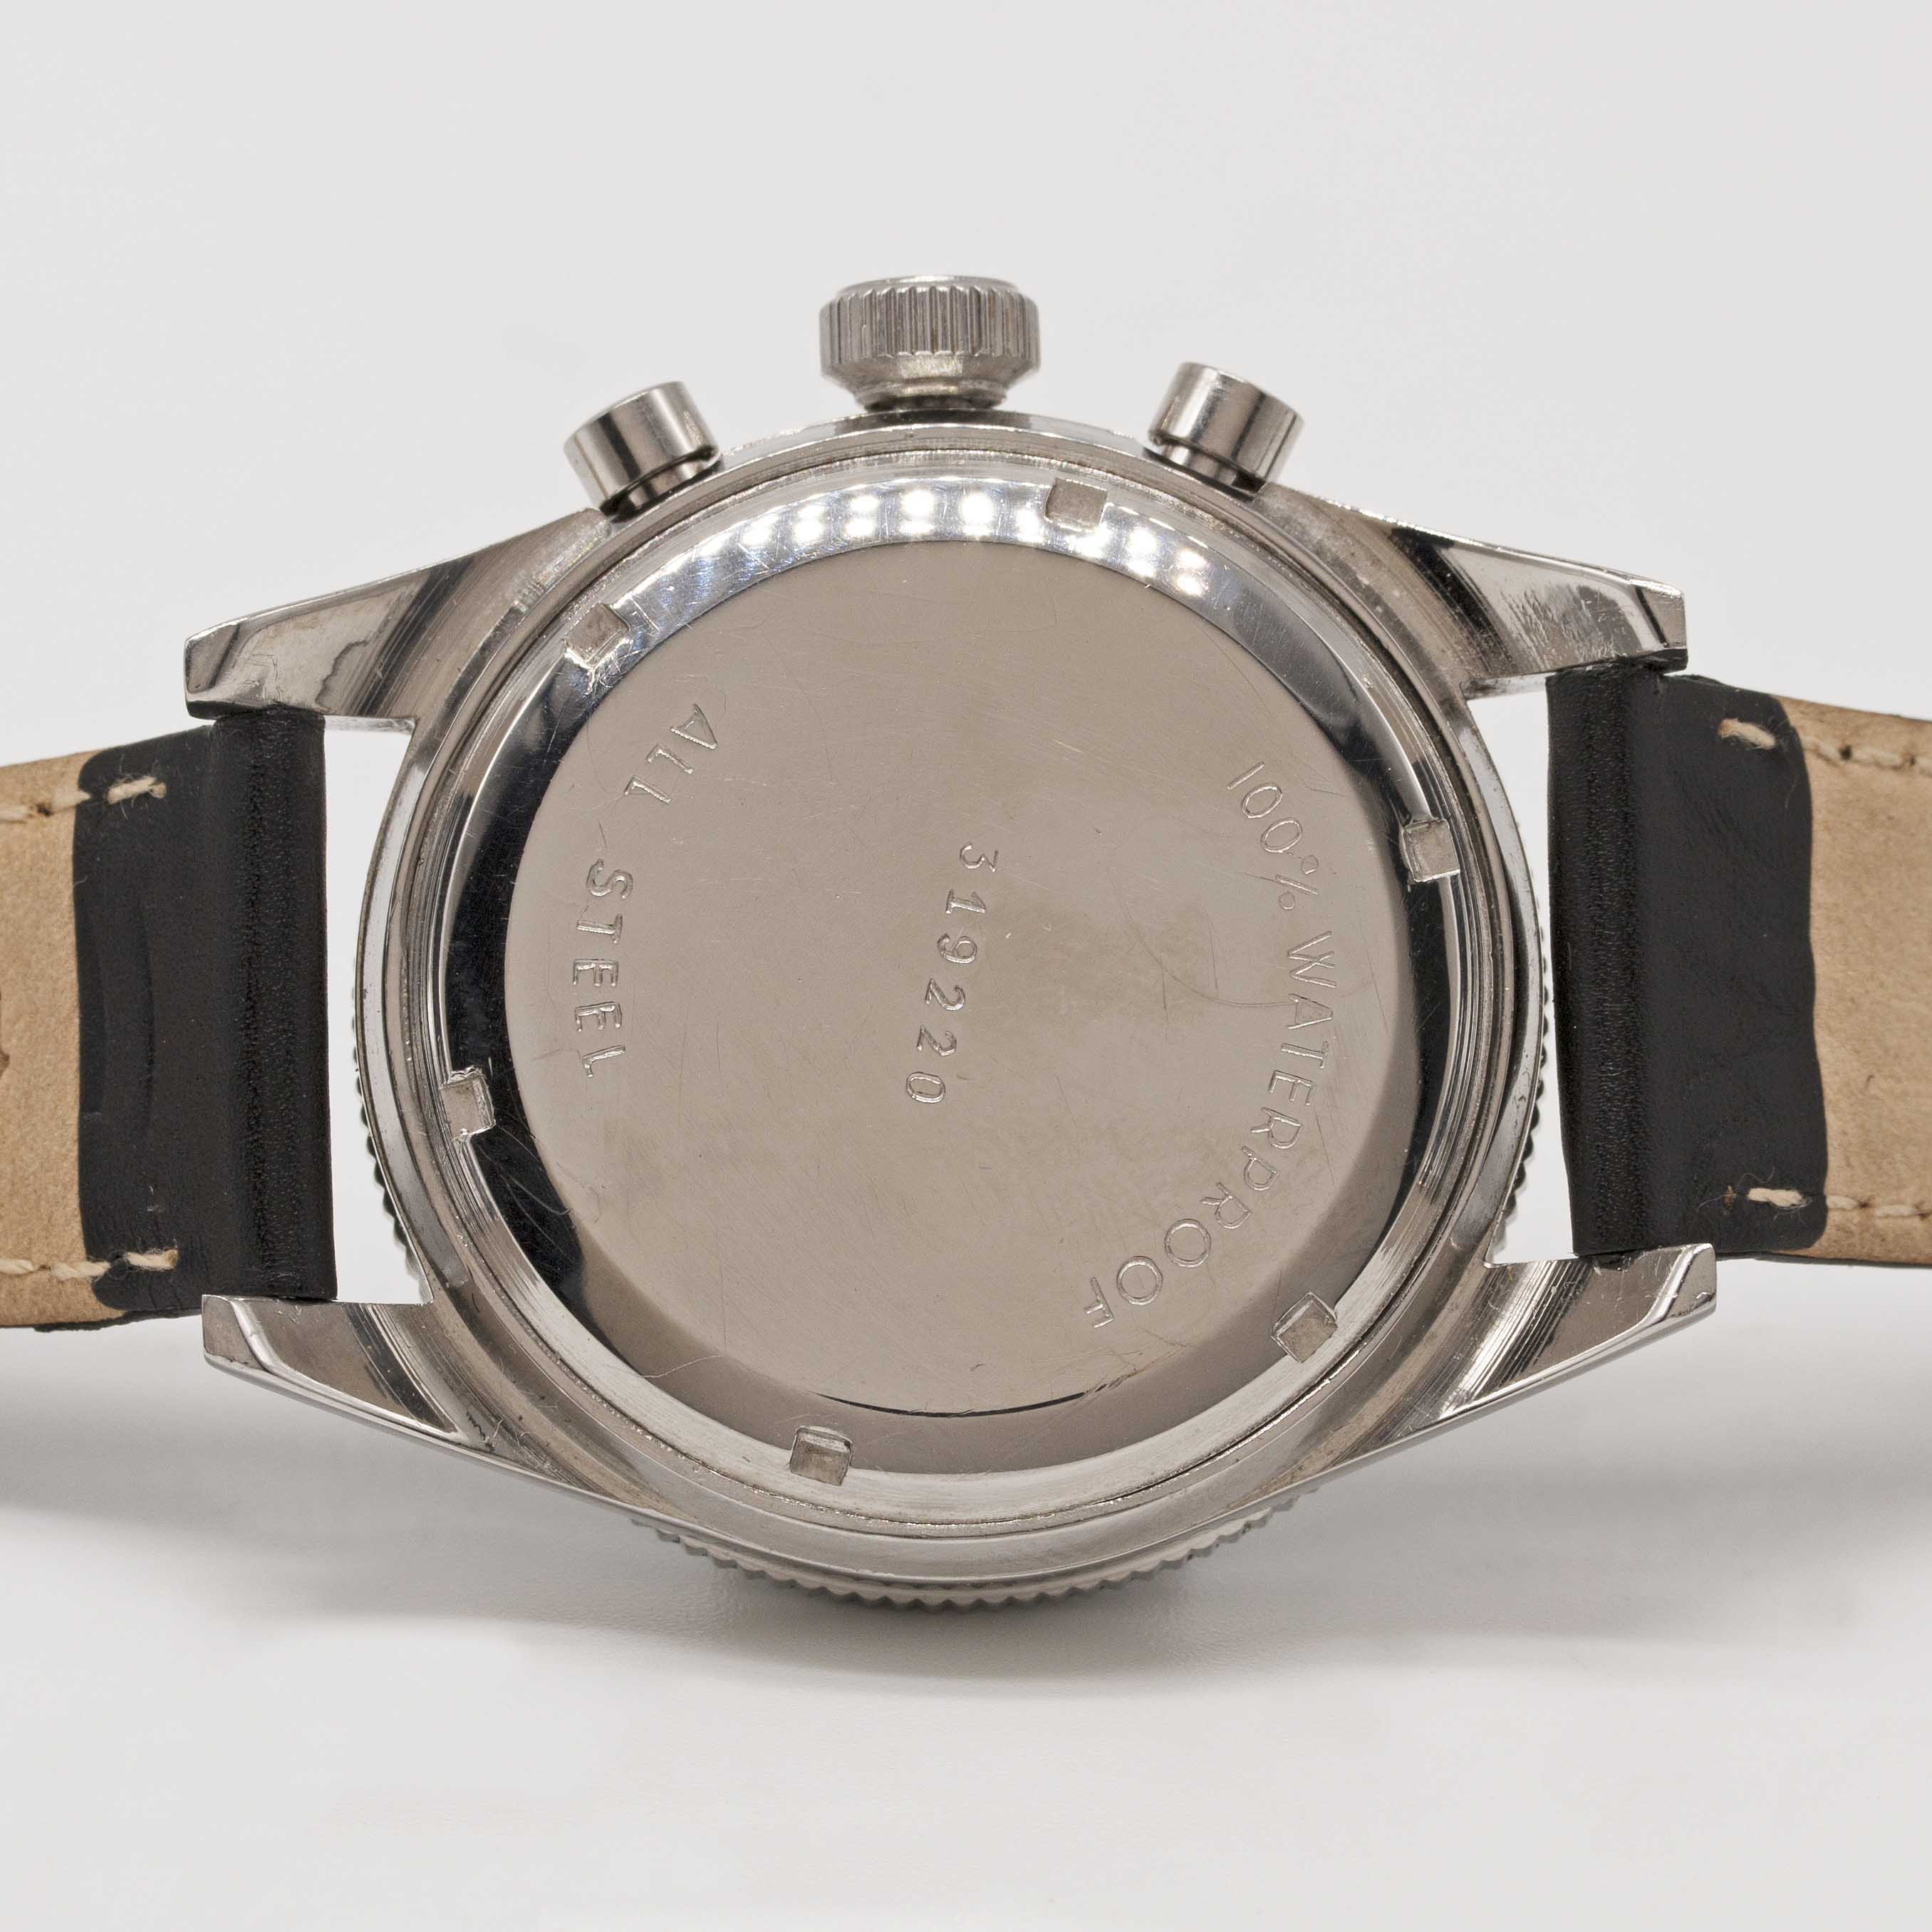 A GENTLEMAN'S STAINLESS STEEL LEJOUR RALLY CHRONOGRAPH WRIST WATCH CIRCA 1969 Movement: 17J, - Image 5 of 6